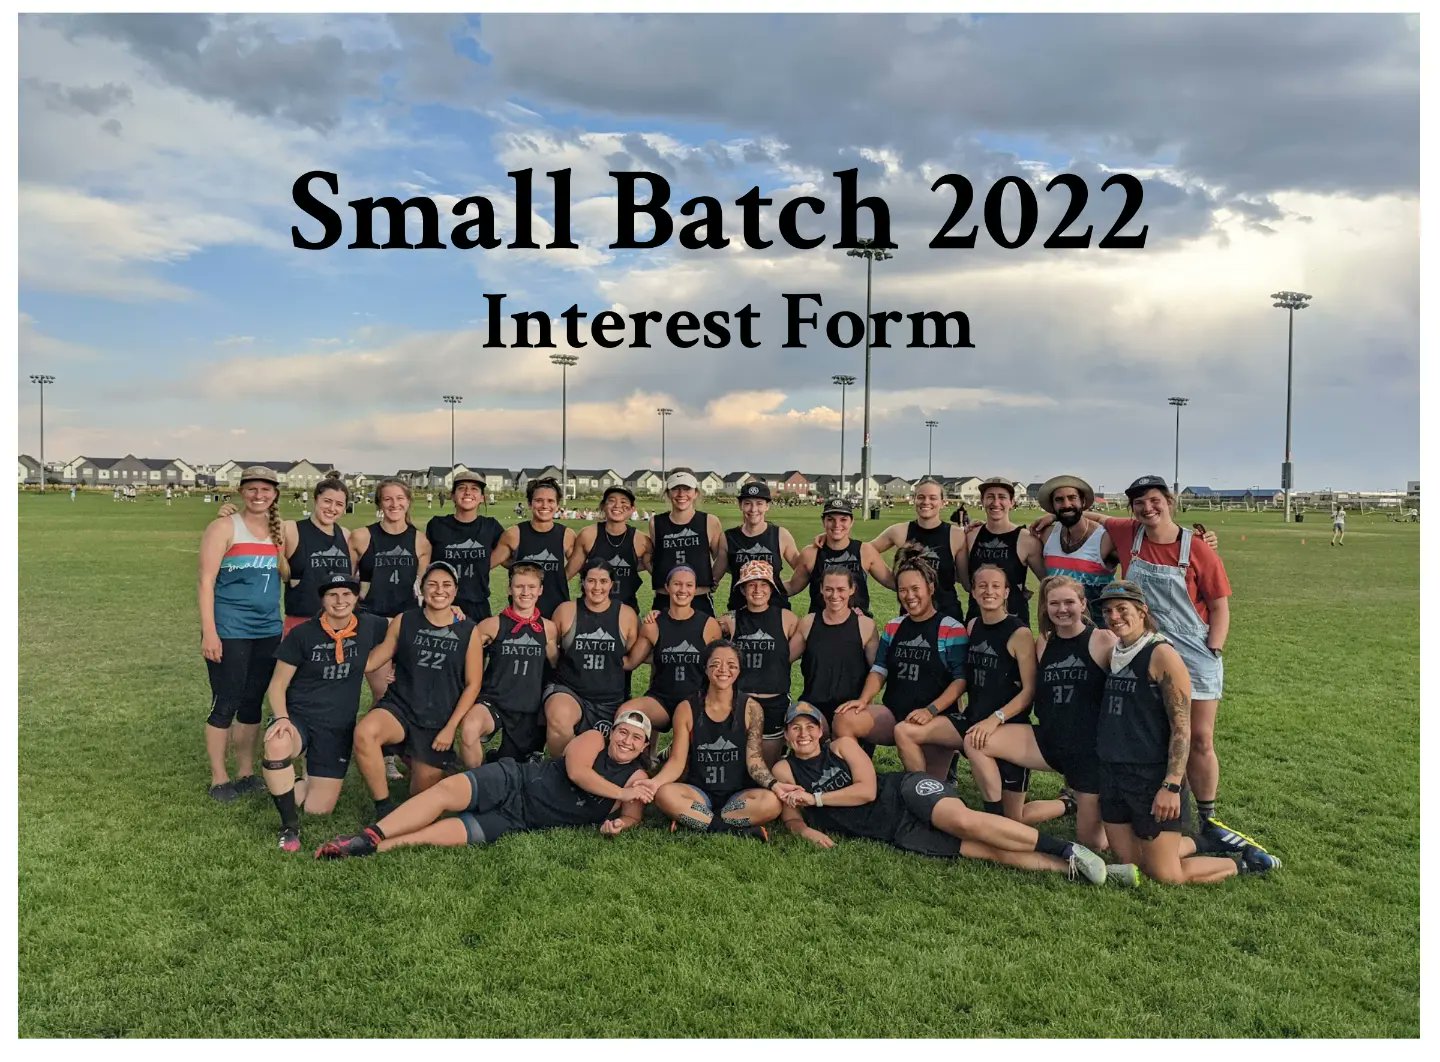 Small Batch Ultimate on Twitter